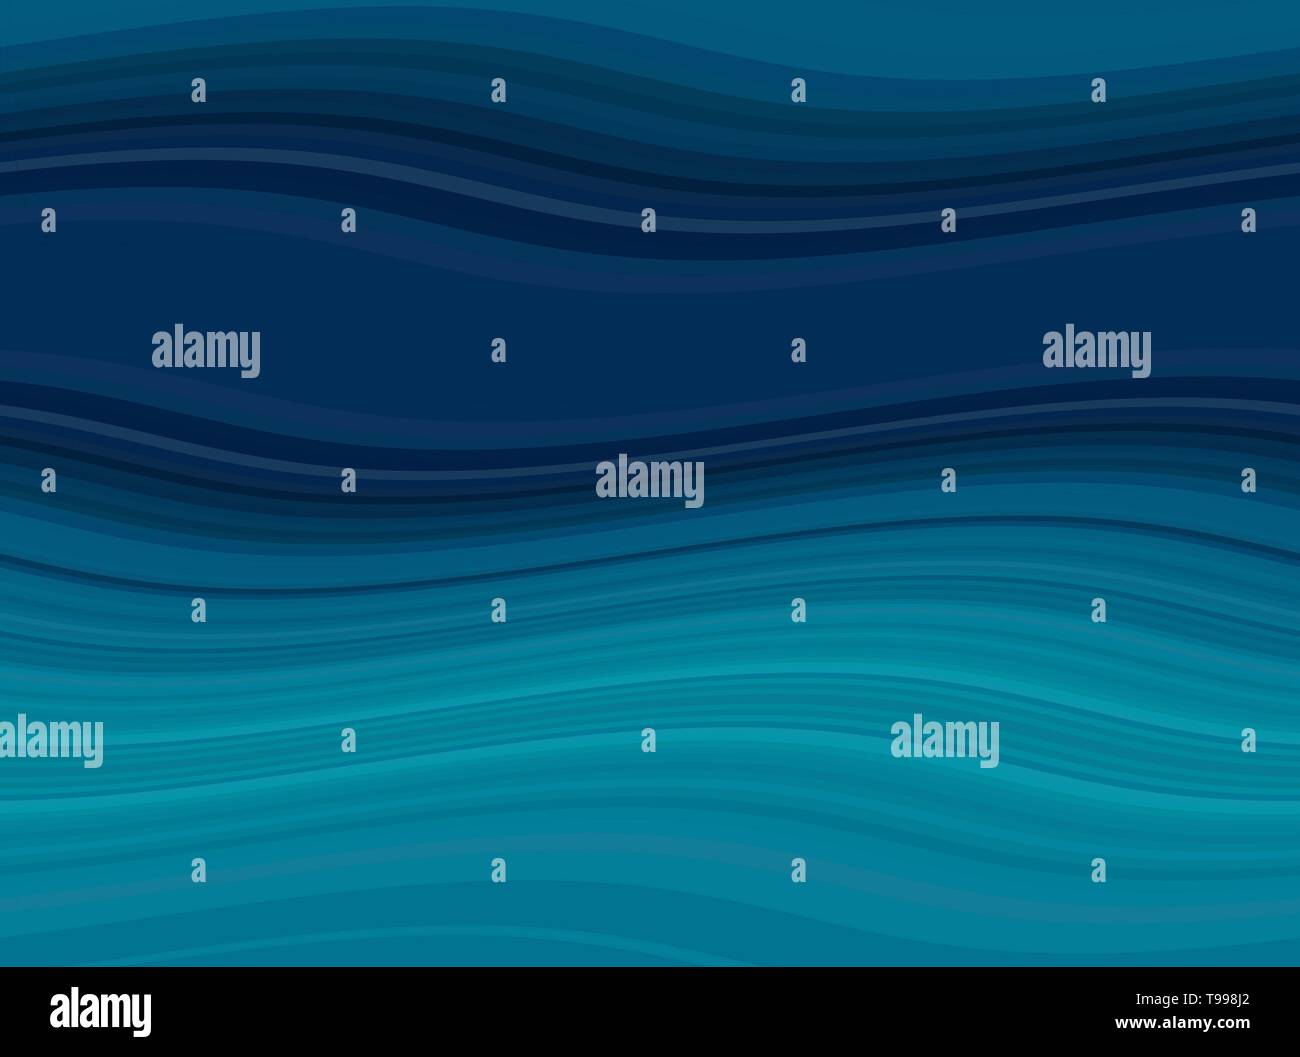 abstract very dark blue, teal and dark cyan color ocean waves background.  can be used for wallpaper, presentation, graphic illustration or texture  Stock Photo - Alamy